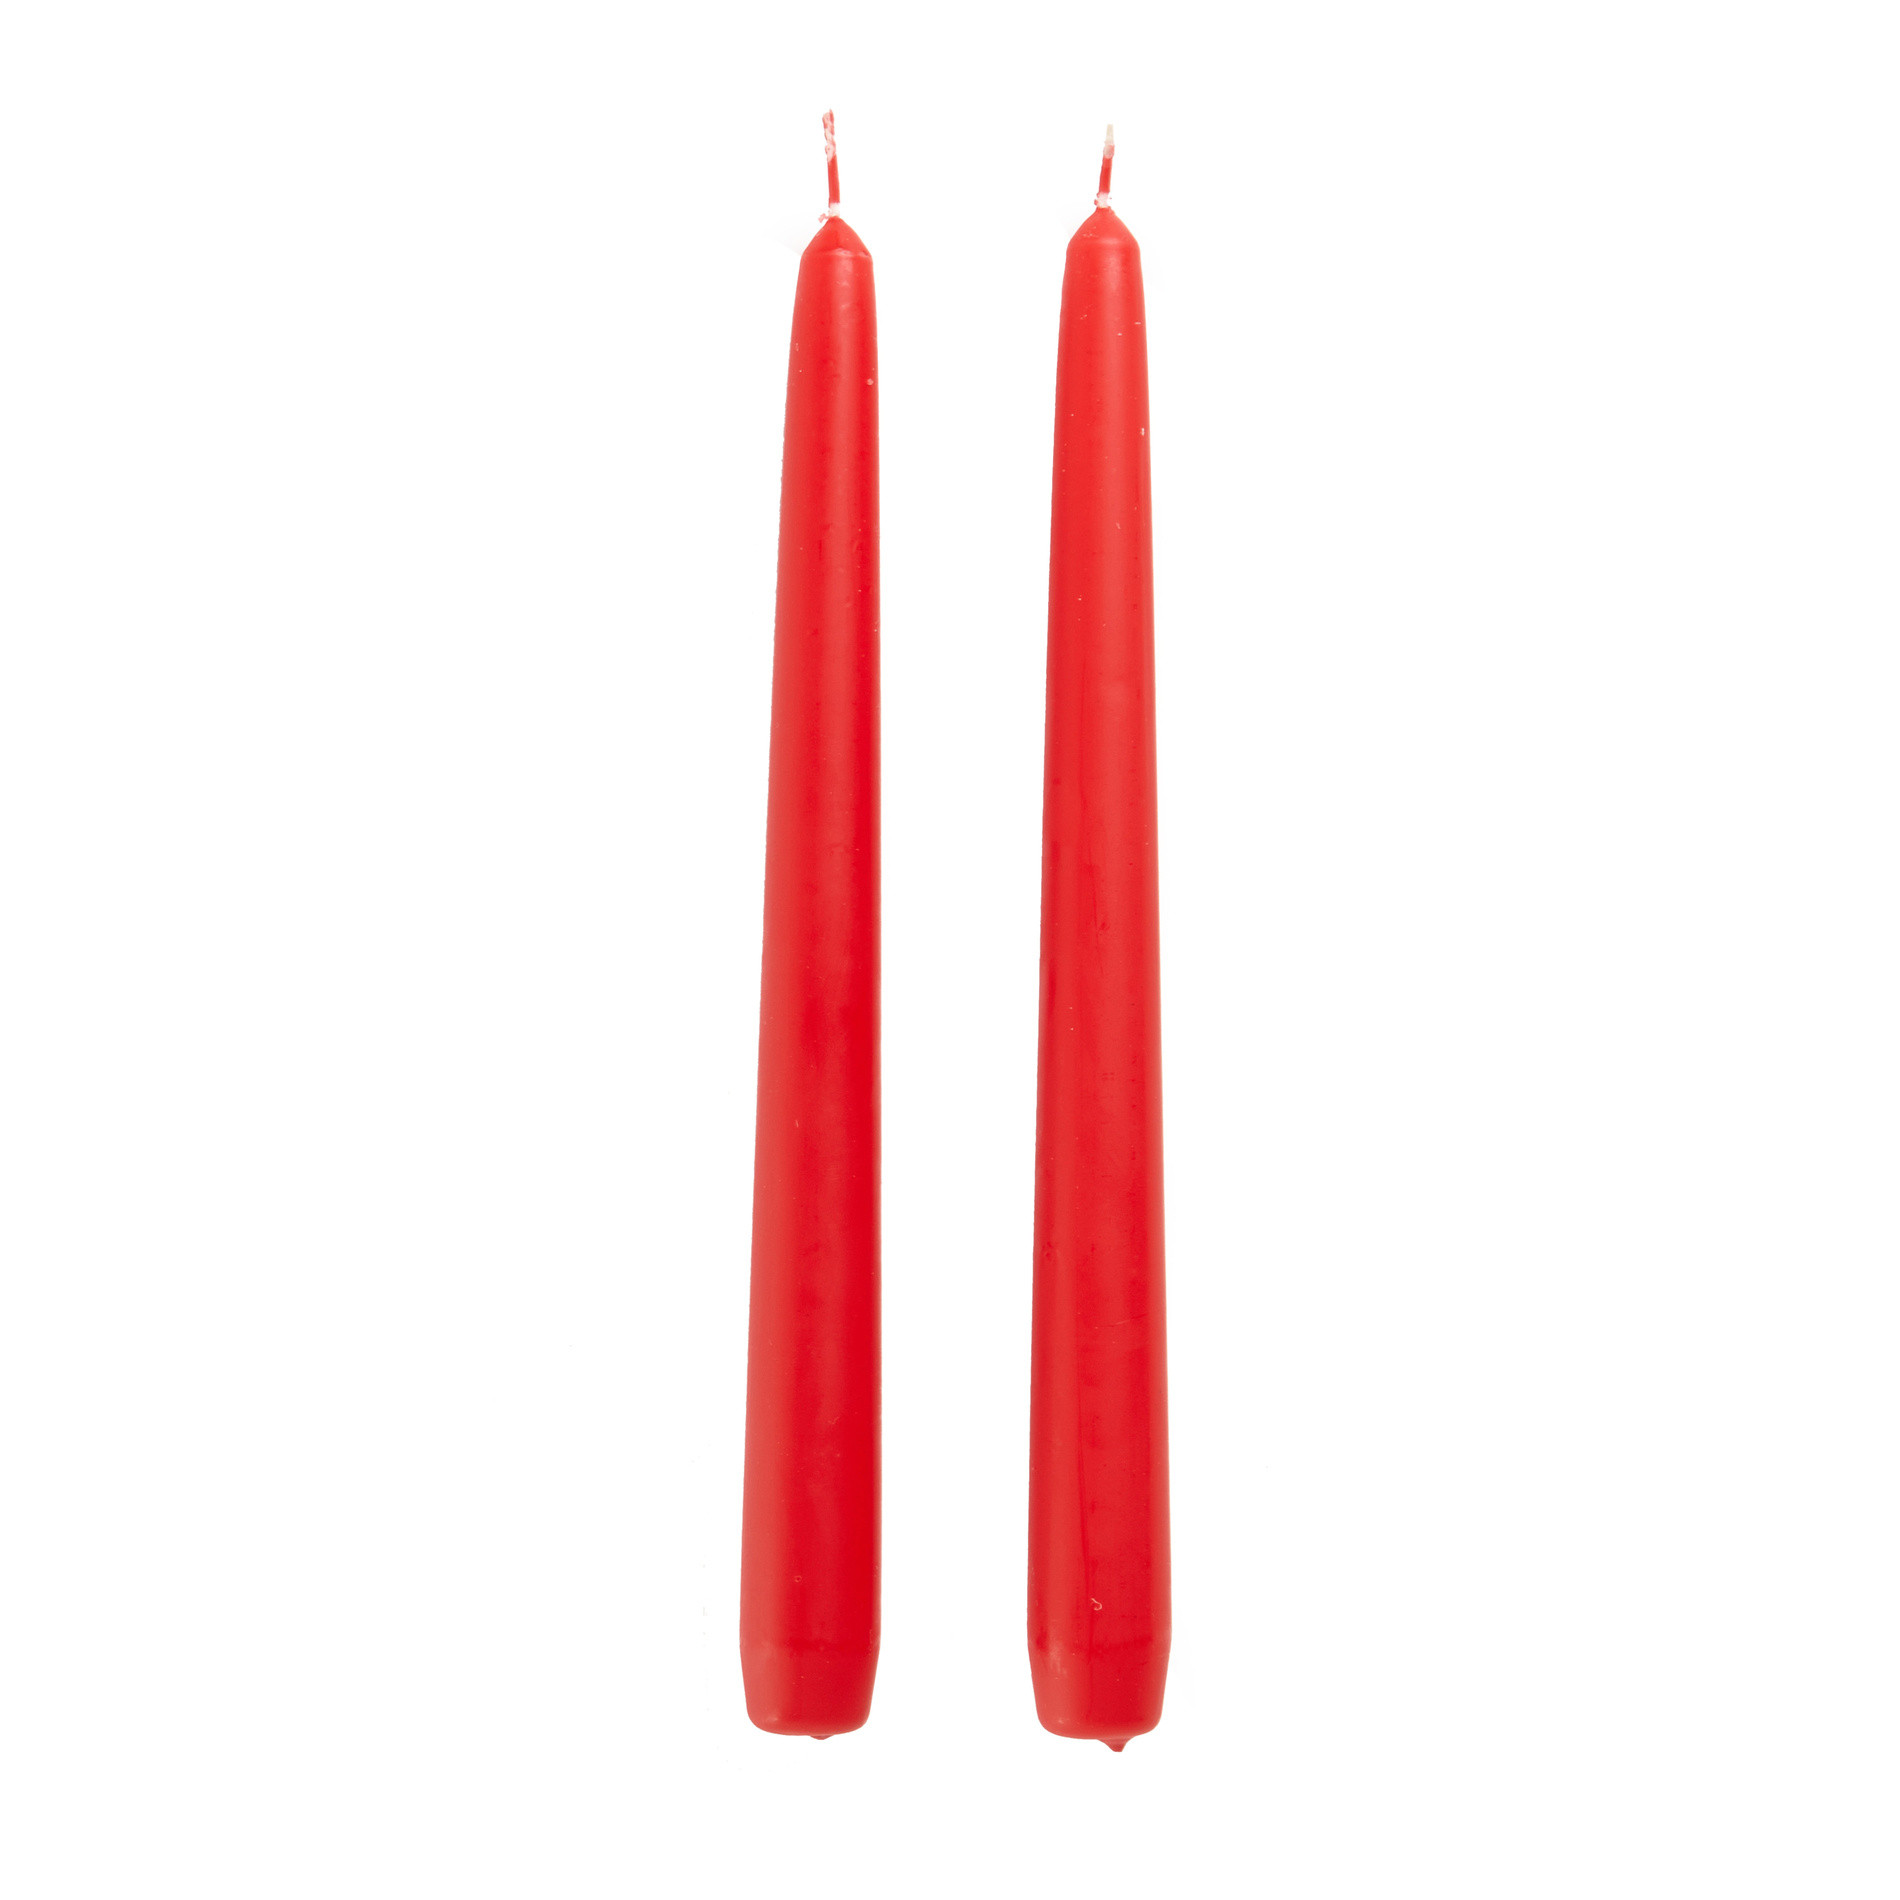 Set 2 candele coniche opache, Rosso, large image number 0